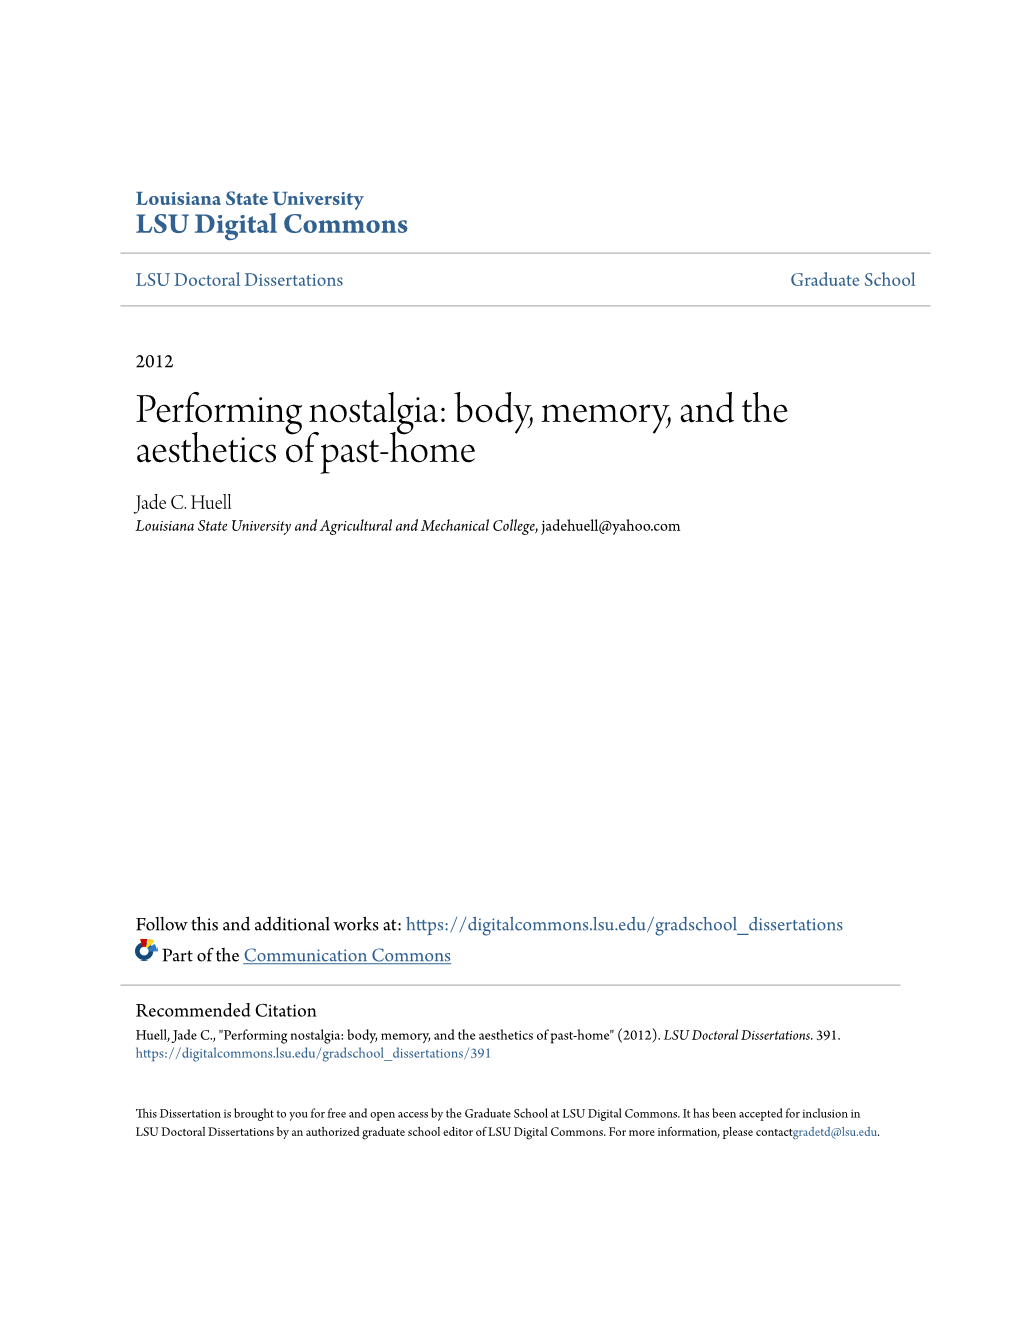 Performing Nostalgia: Body, Memory, and the Aesthetics of Past-Home Jade C